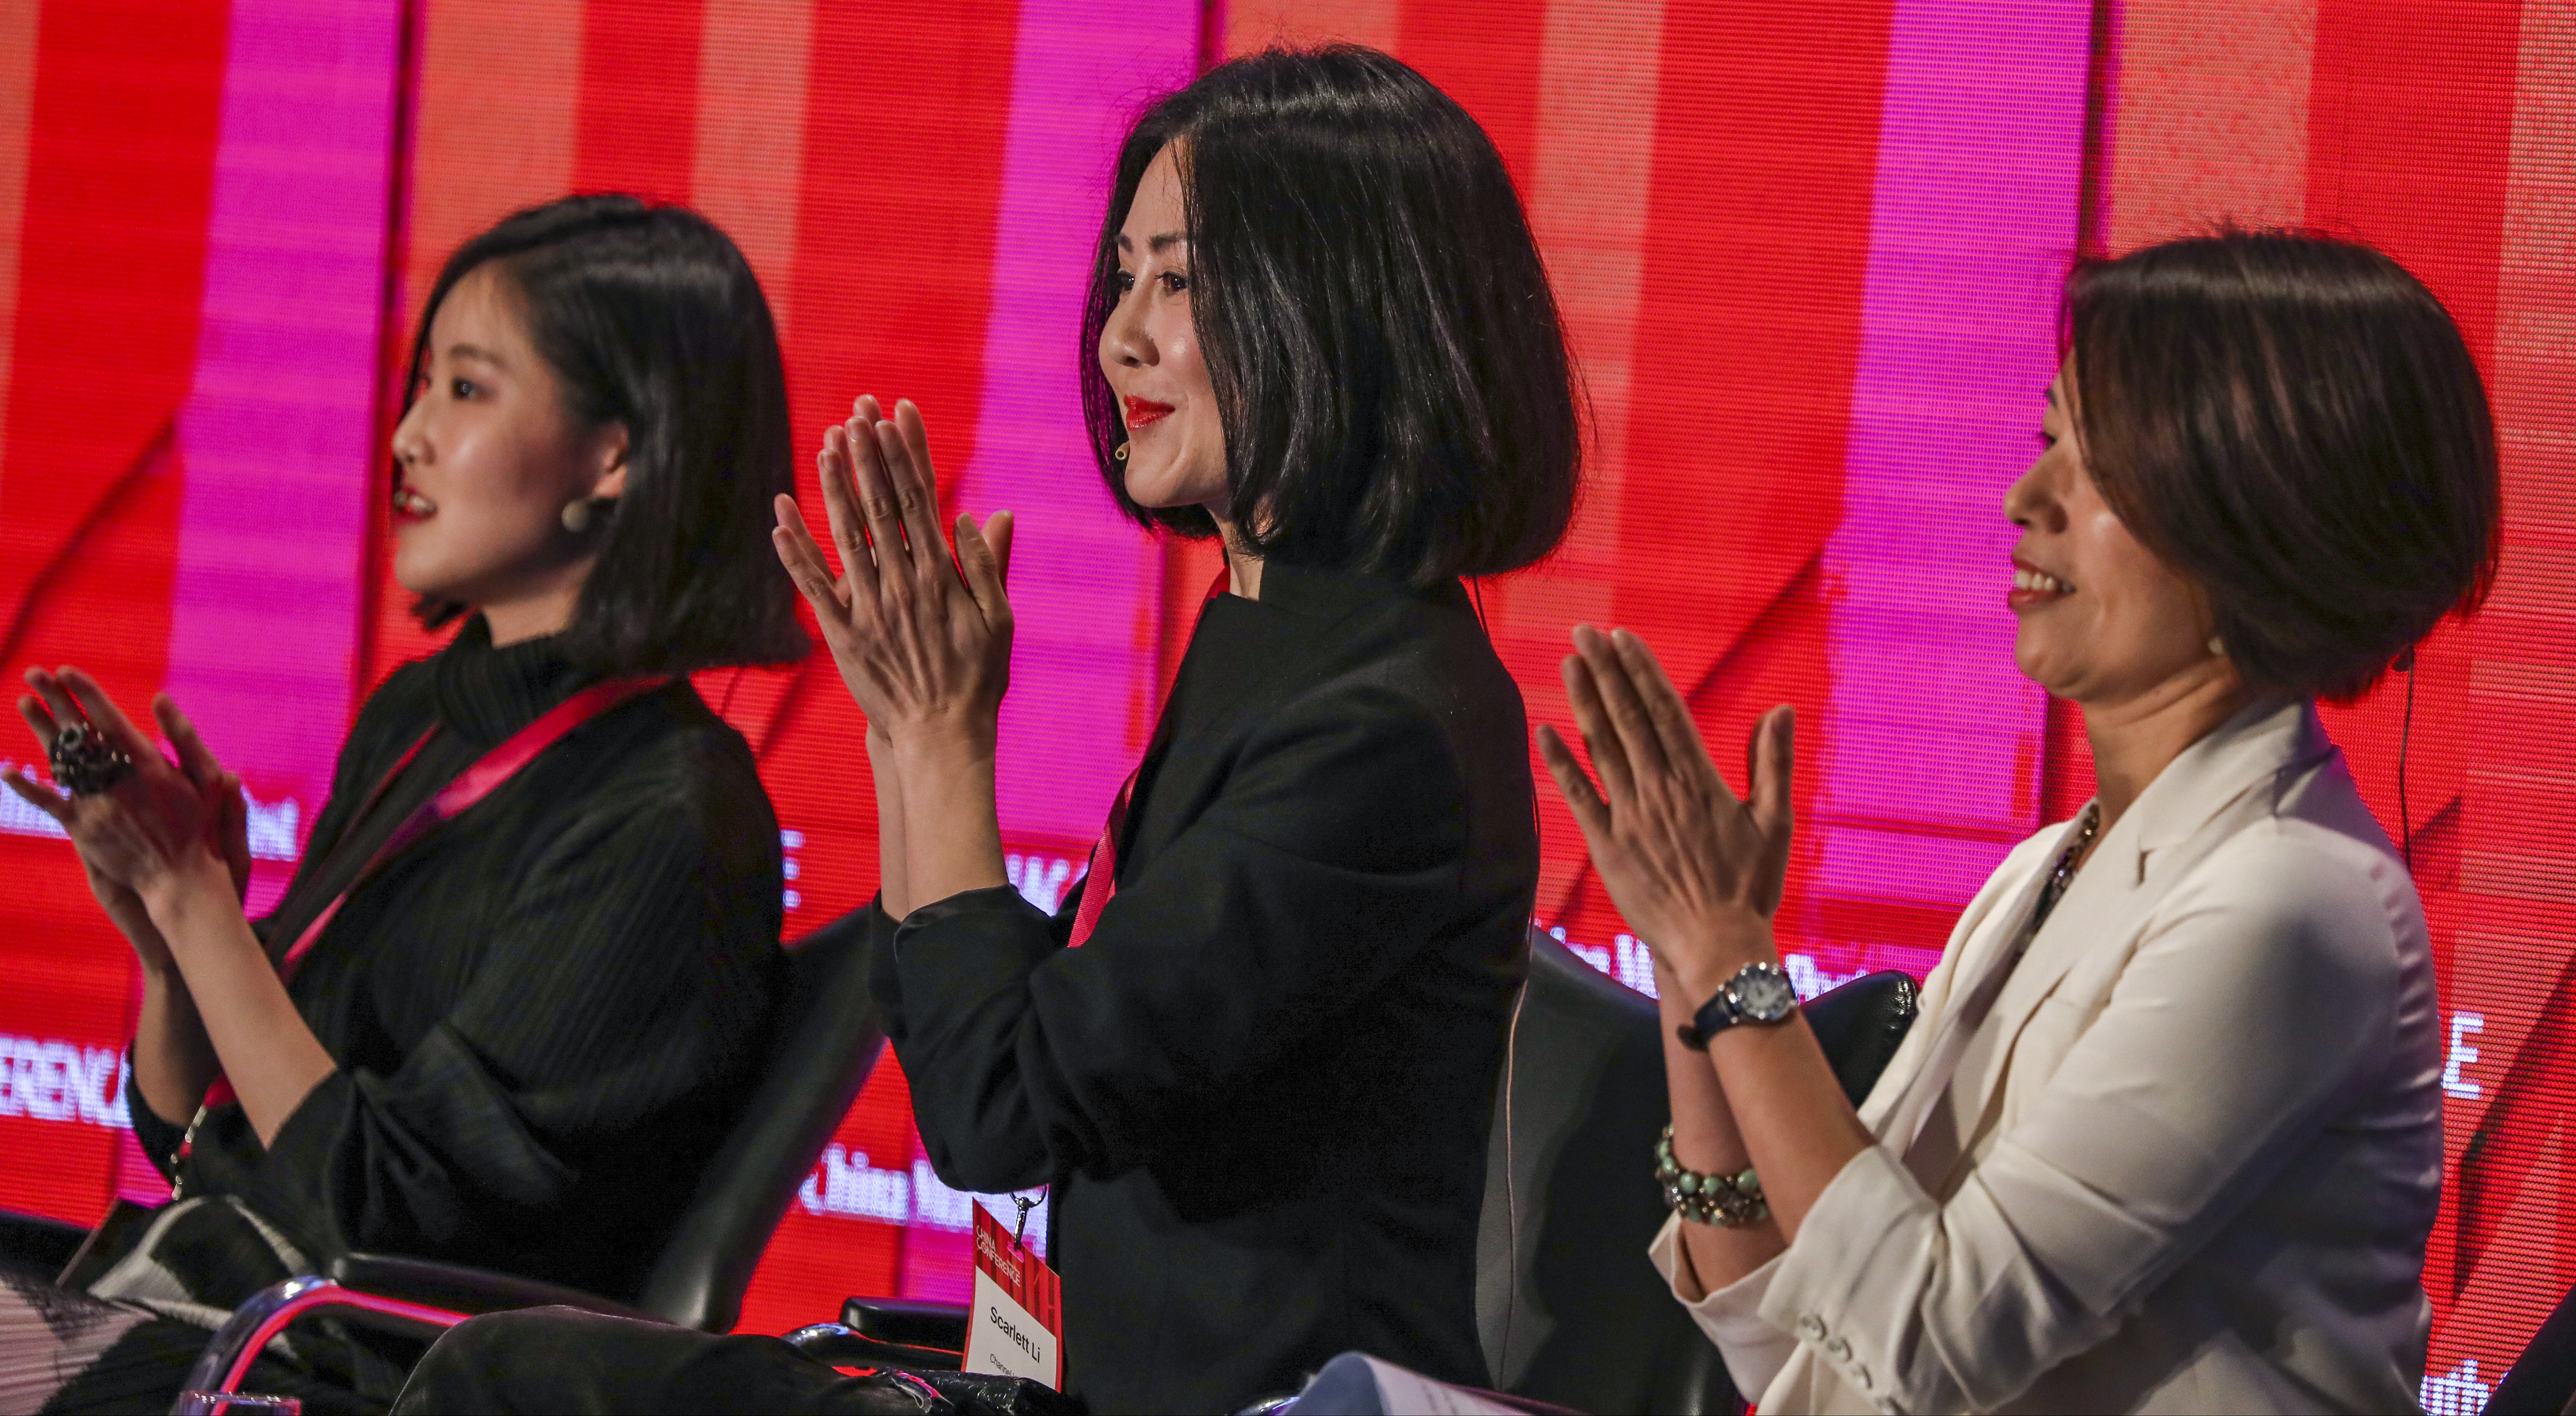 (From left) Daisy Guo, Scarlett Li and Susanne Choi attend a session on women’s issues at the China Conference in Hong Kong on Thursday. Photo: Nora Tam